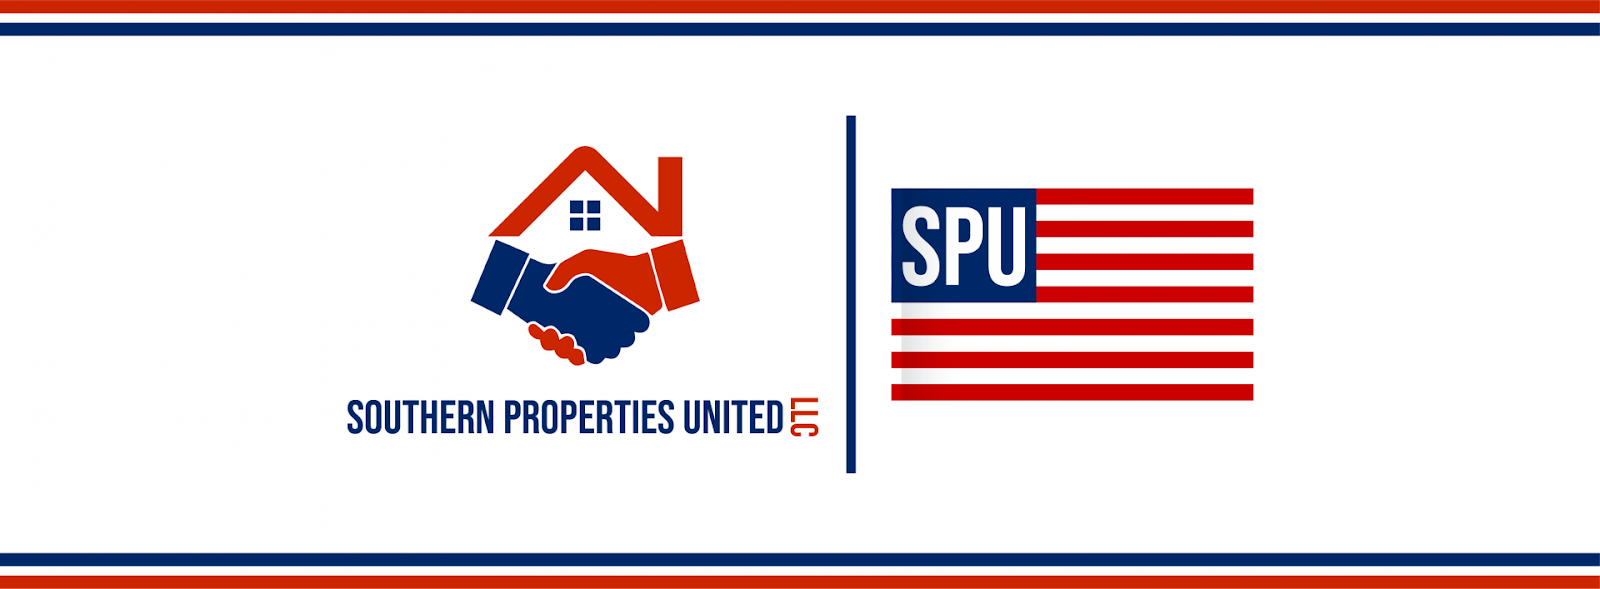 Southern Properties United